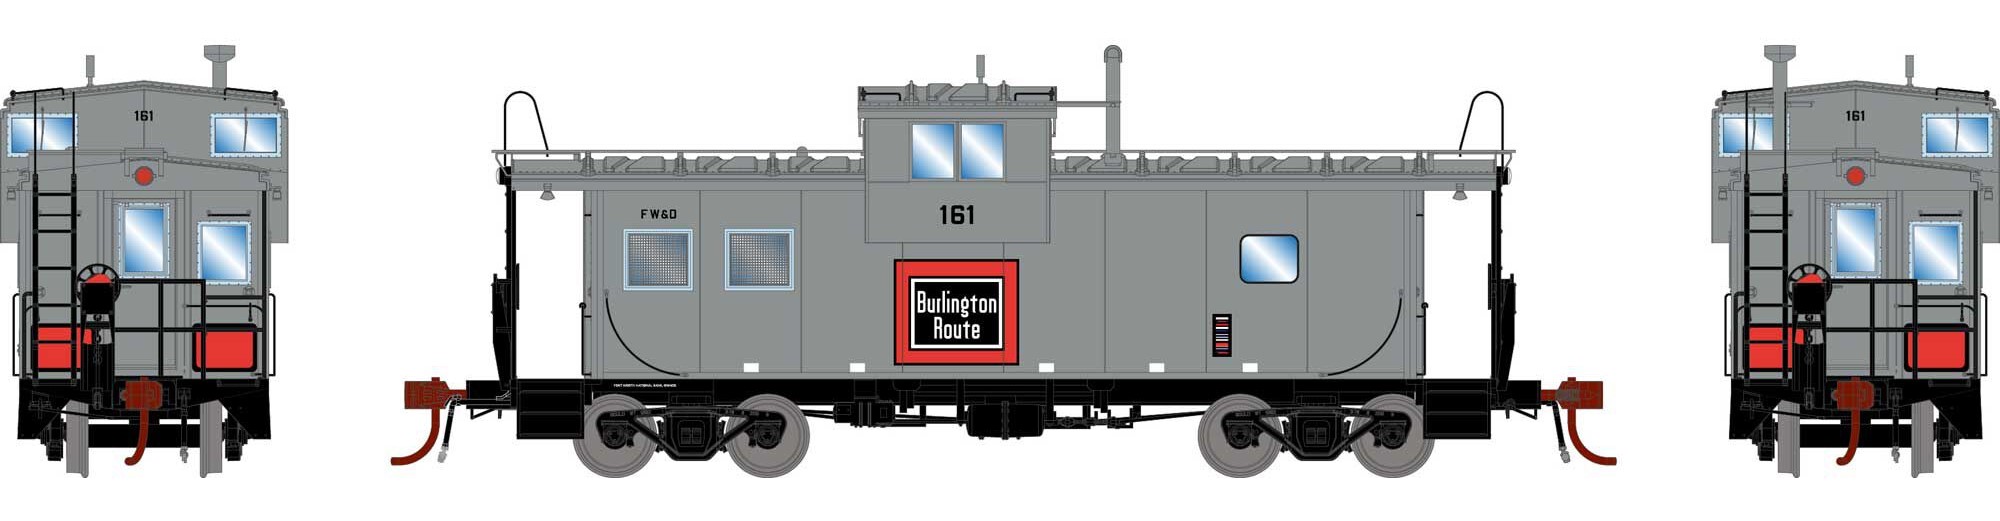 Athearn Genesis HO ATHG78573 DCC/NCE Equipped ICC Caboose With Lights Fort Worth & Dodge 'Burlington Route' FW&D #161